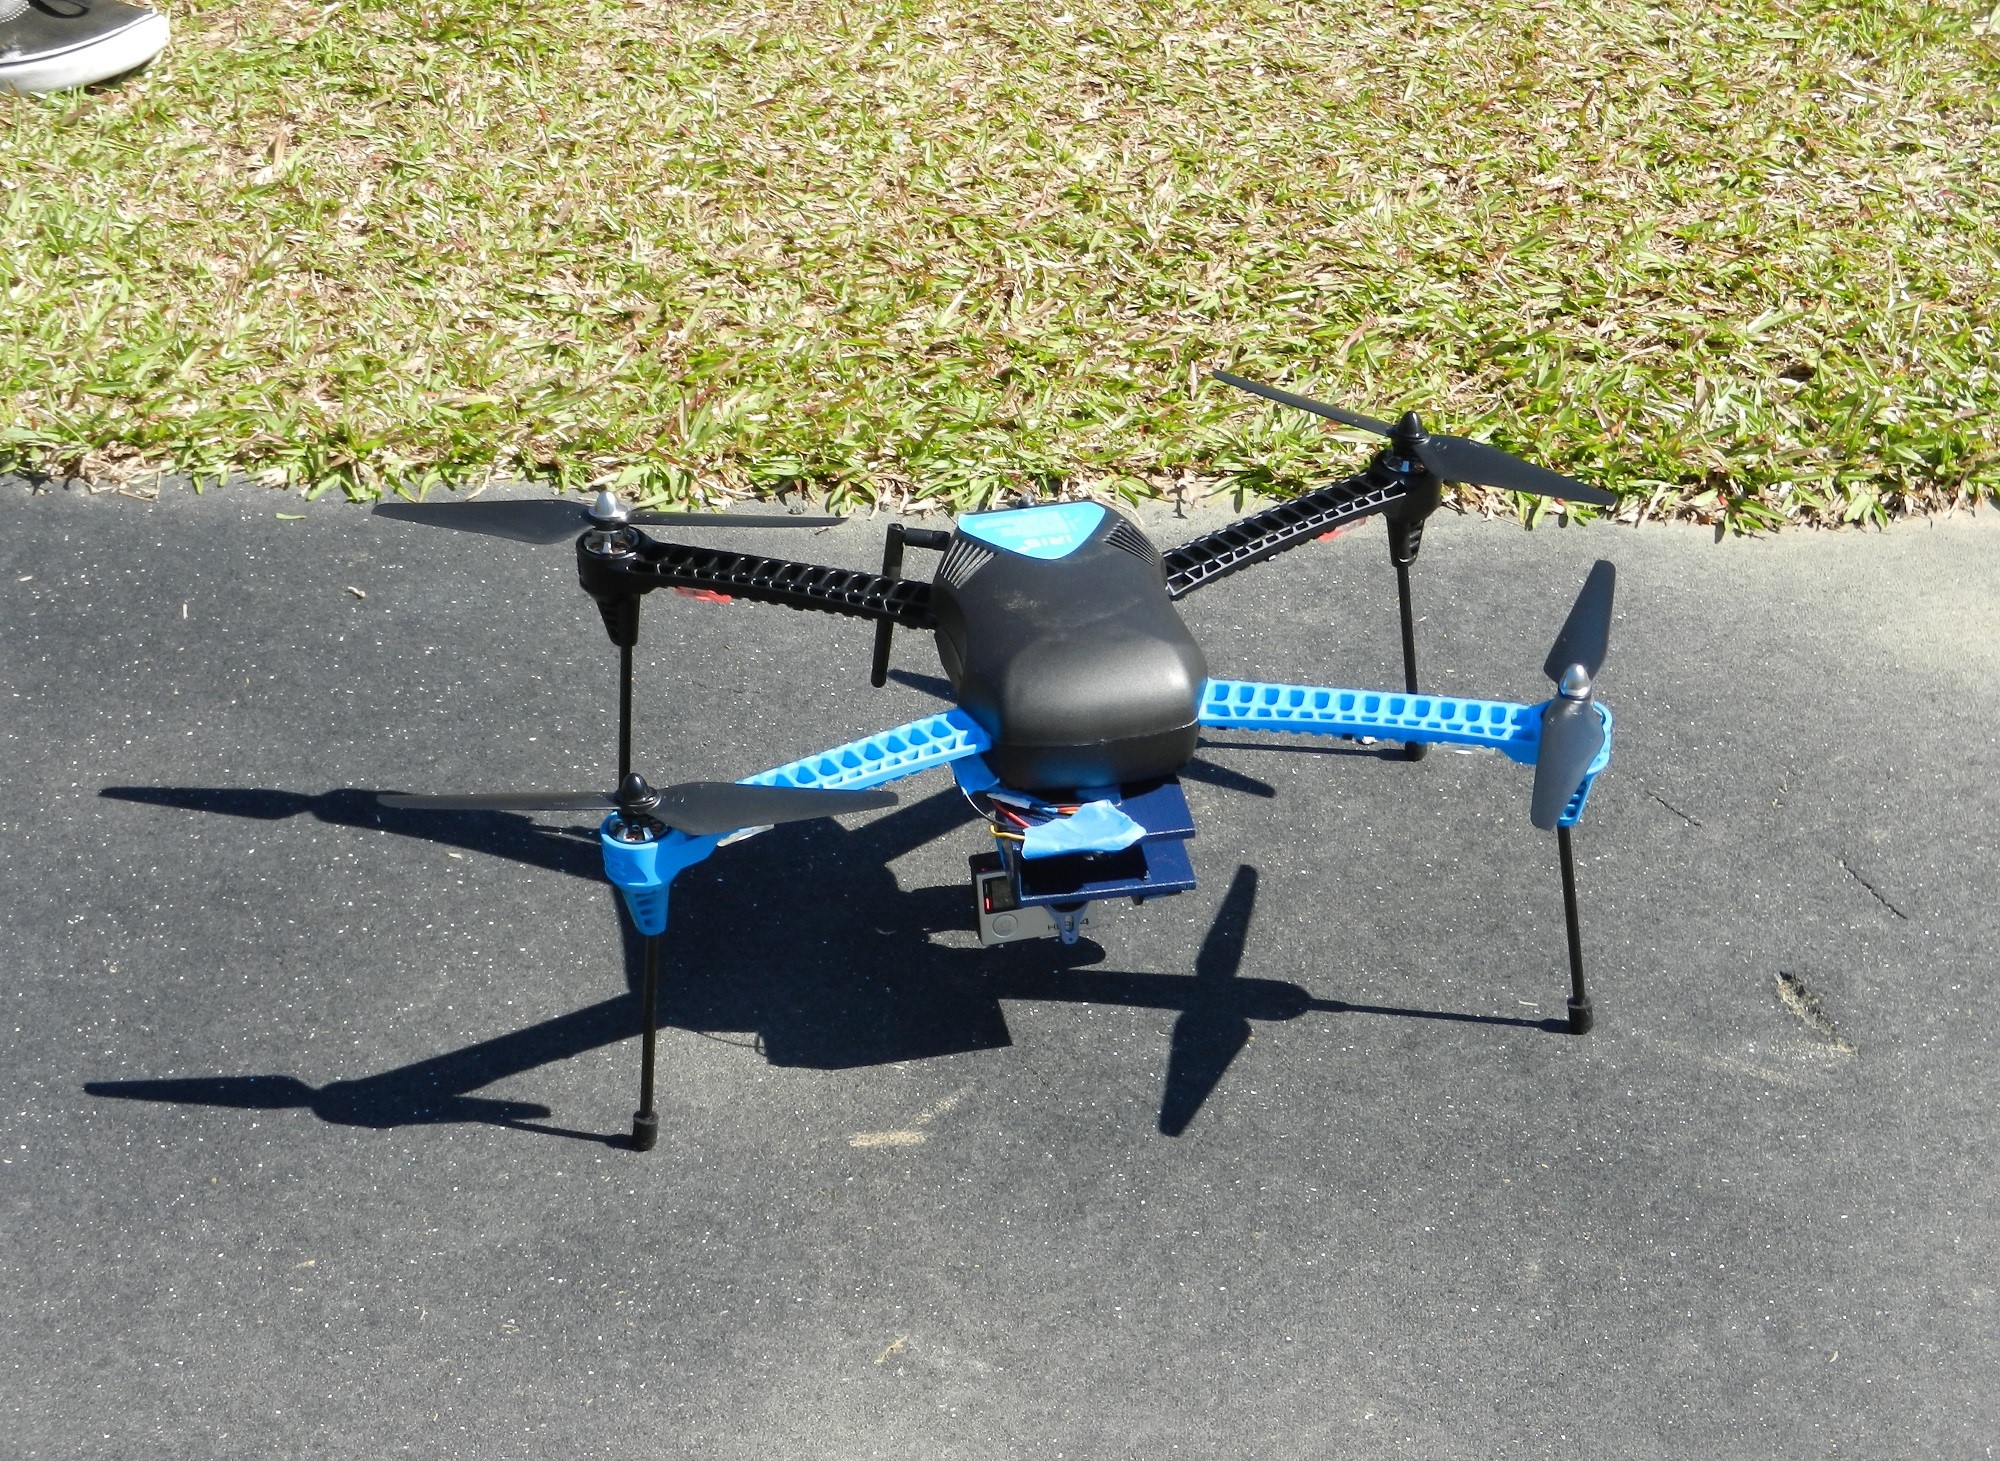 Quadcopter on the ground